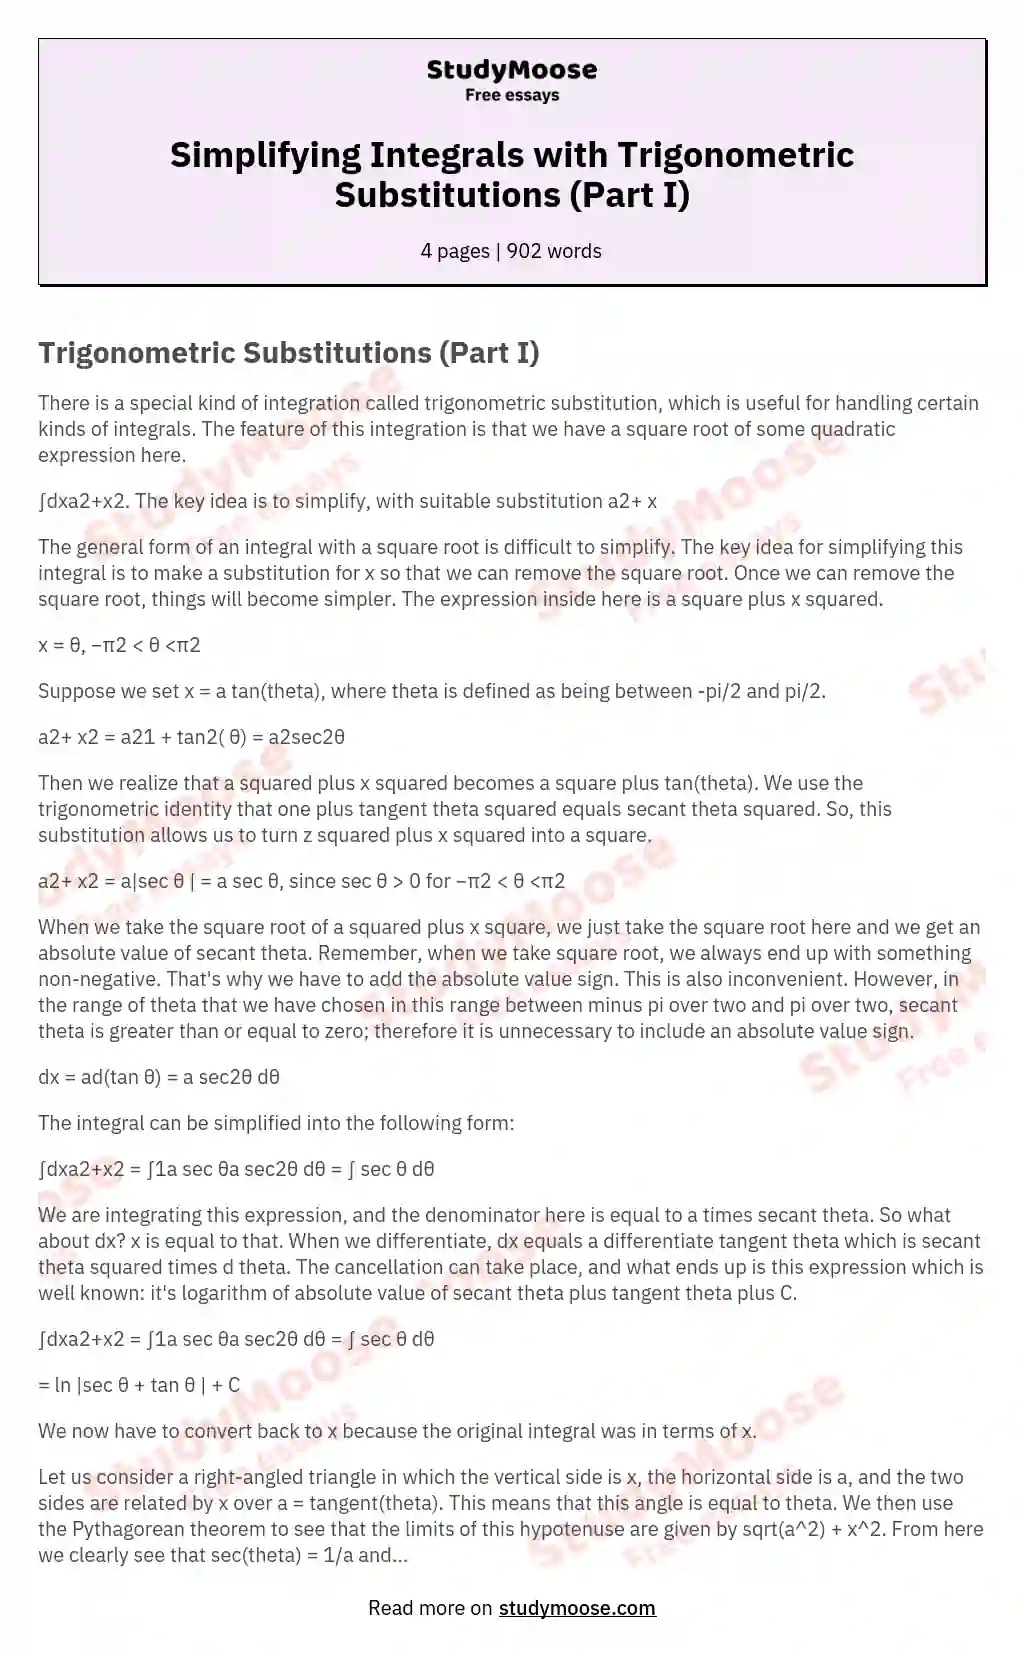 Simplifying Integrals with Trigonometric Substitutions (Part I) essay